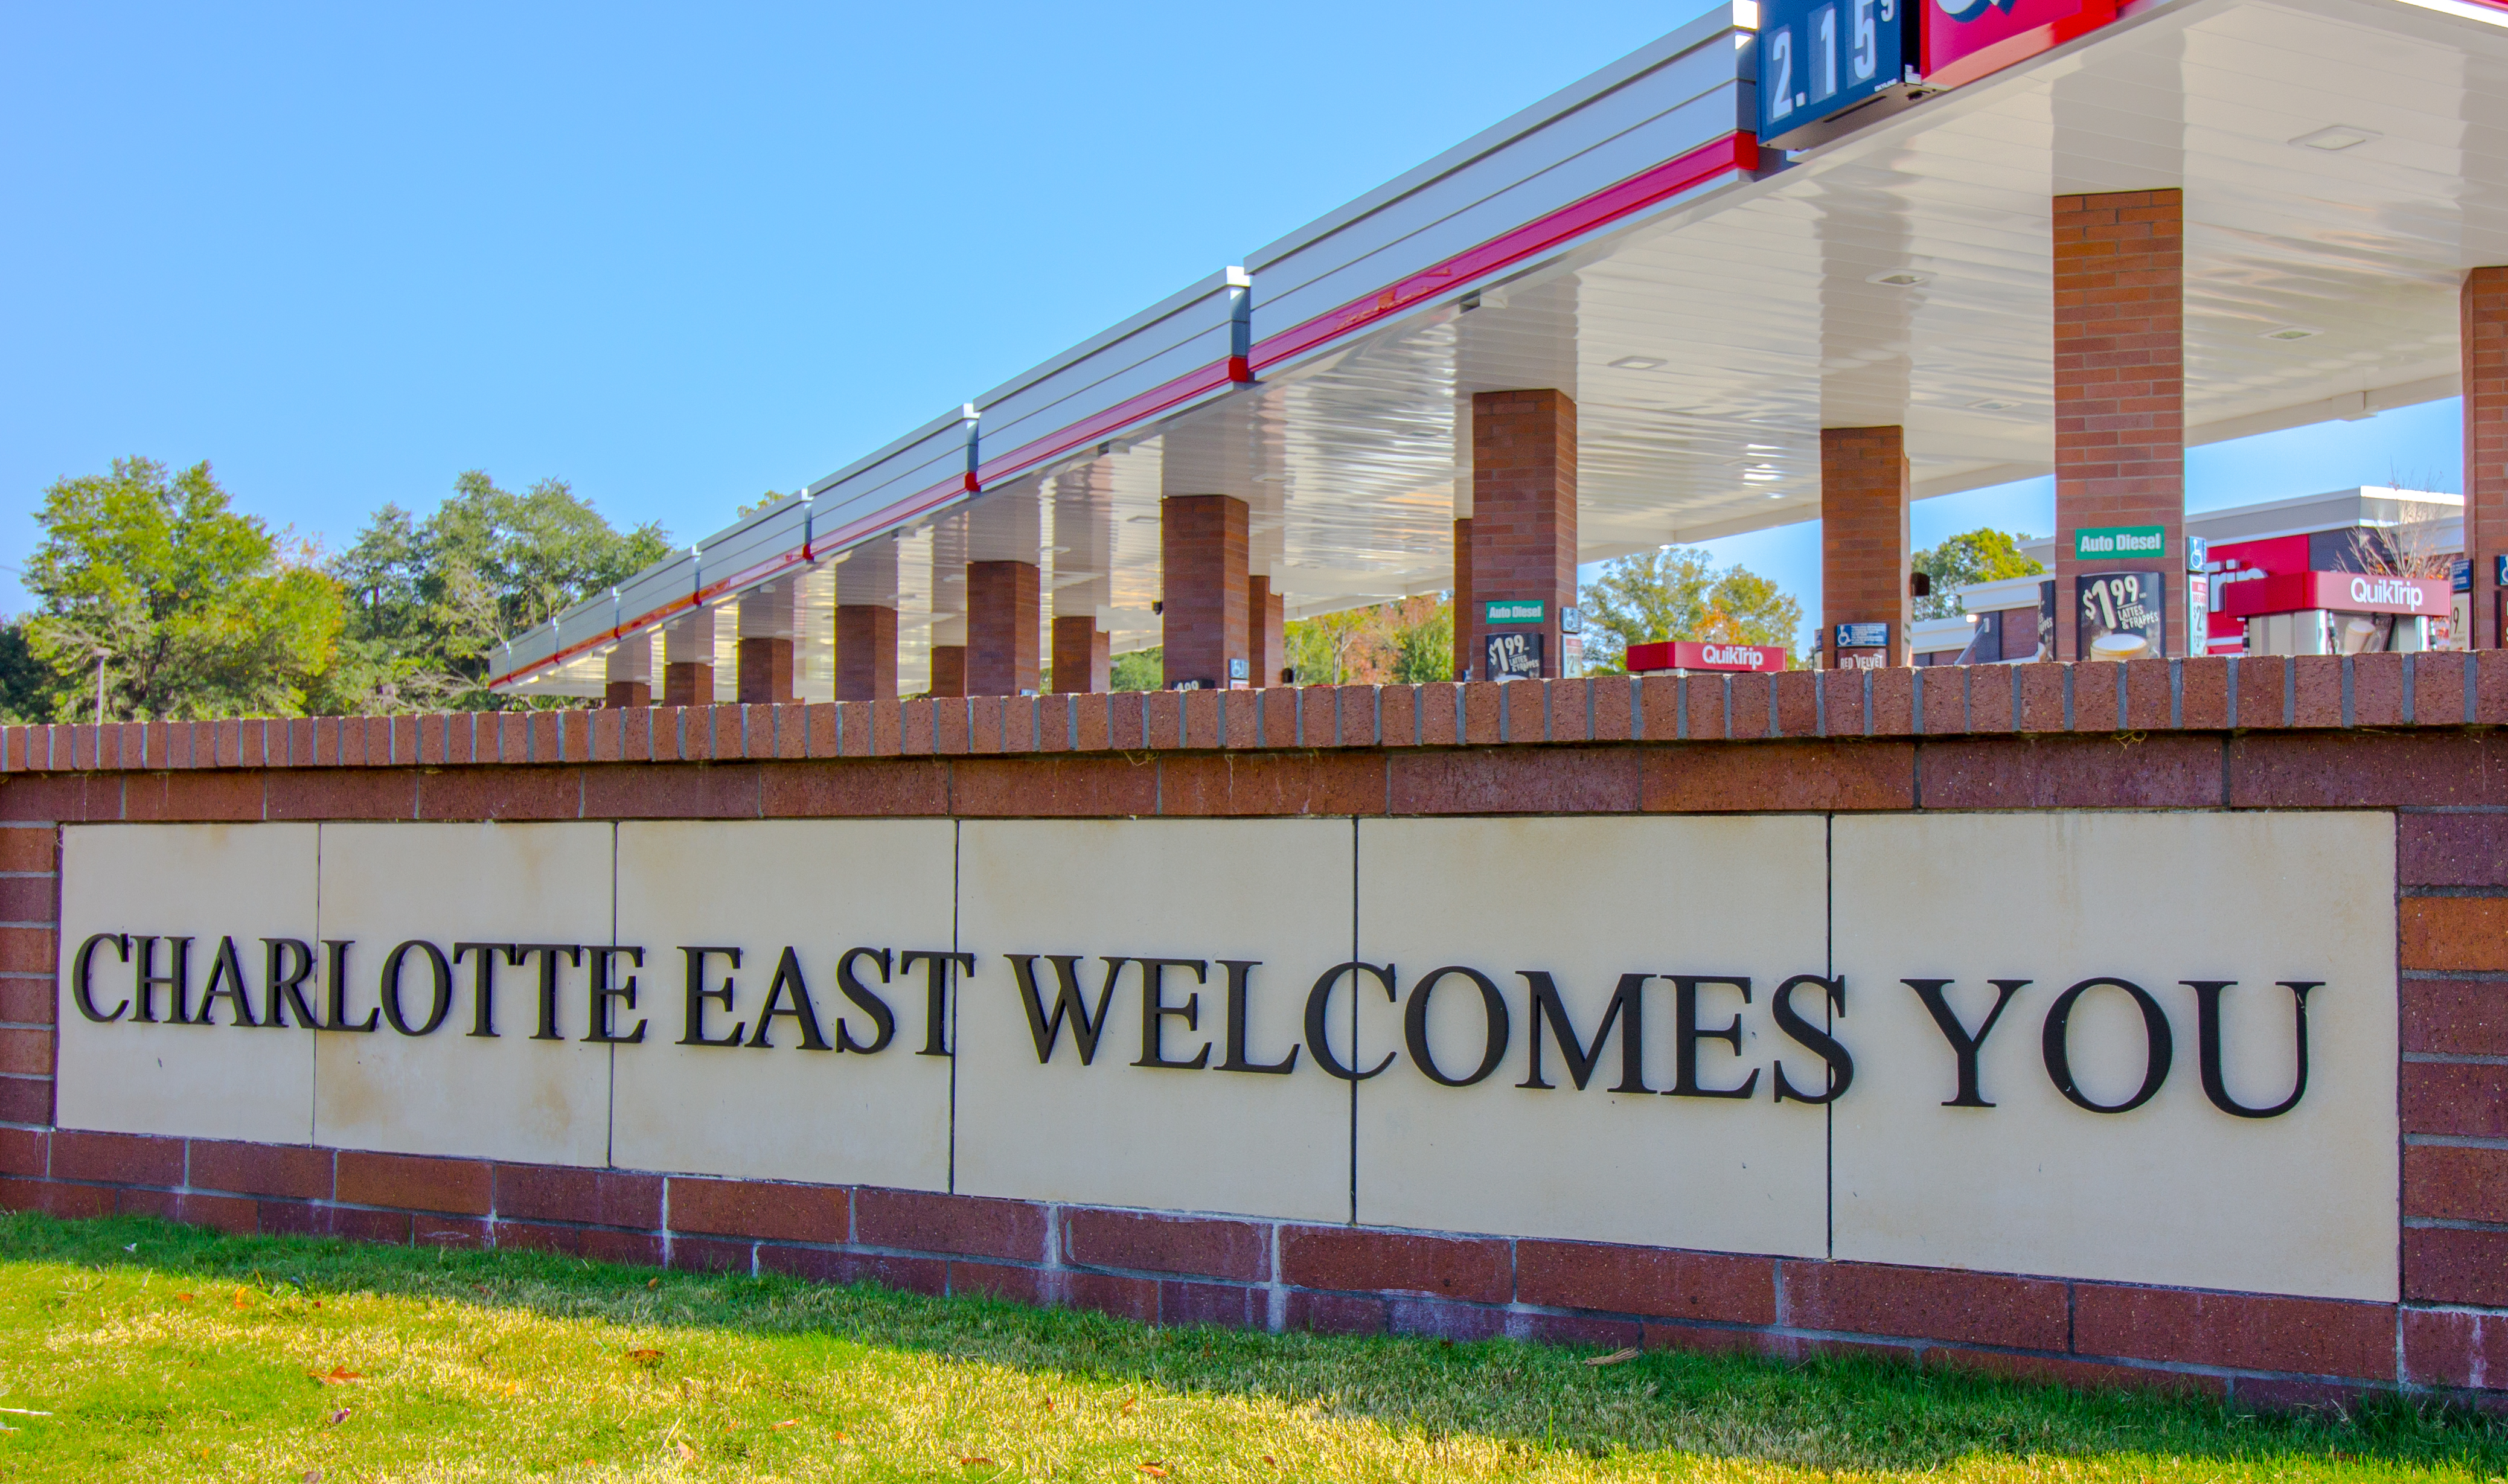 Charlotte East welcomes you